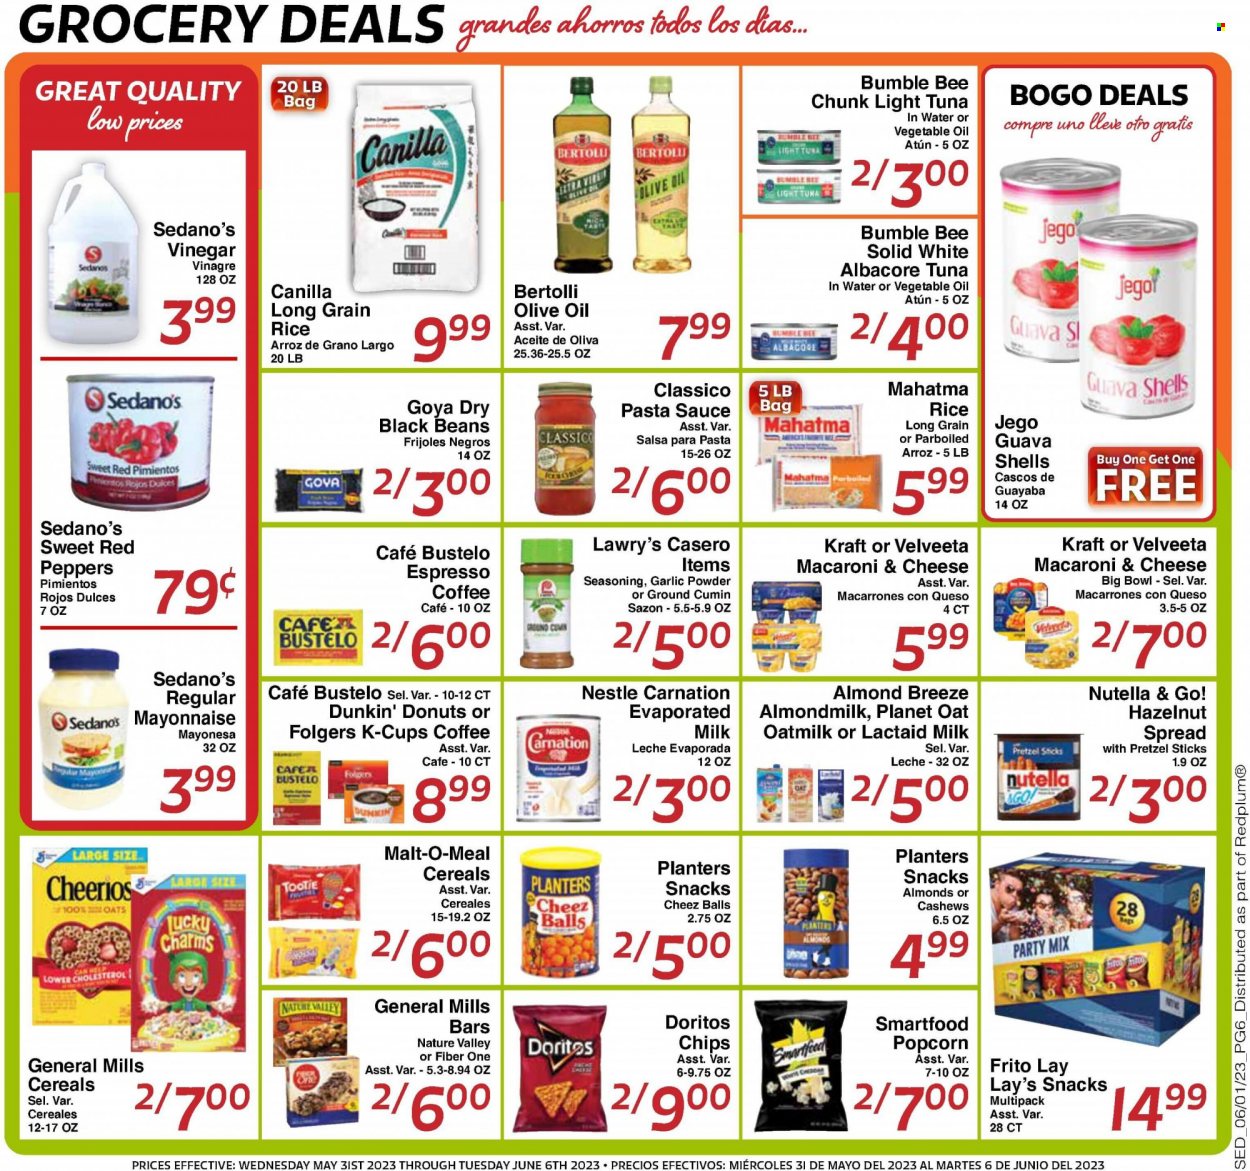 thumbnail - Sedano's Flyer - 05/31/2023 - 06/06/2023 - Sales products - pretzels, donut, Dunkin' Donuts, peppers, red peppers, tuna, macaroni & cheese, pasta sauce, Bumble Bee, sauce, Kraft®, Bertolli, snack, Lactaid, almond milk, evaporated milk, Almond Breeze, oat milk, Nestlé, Nutella, General Mills, Doritos, chips, Lay’s, Smartfood, popcorn, salty snack, malt, black beans, tuna in water, light tuna, Goya, cereals, Cheerios, Nature Valley, Fiber One, rice, long grain rice, spice, cumin, garlic powder, salsa, Classico, olive oil, oil, hazelnut spread, cashews, Planters, water, coffee, Folgers, coffee capsules, K-Cups, bowl, Go!. Page 6.